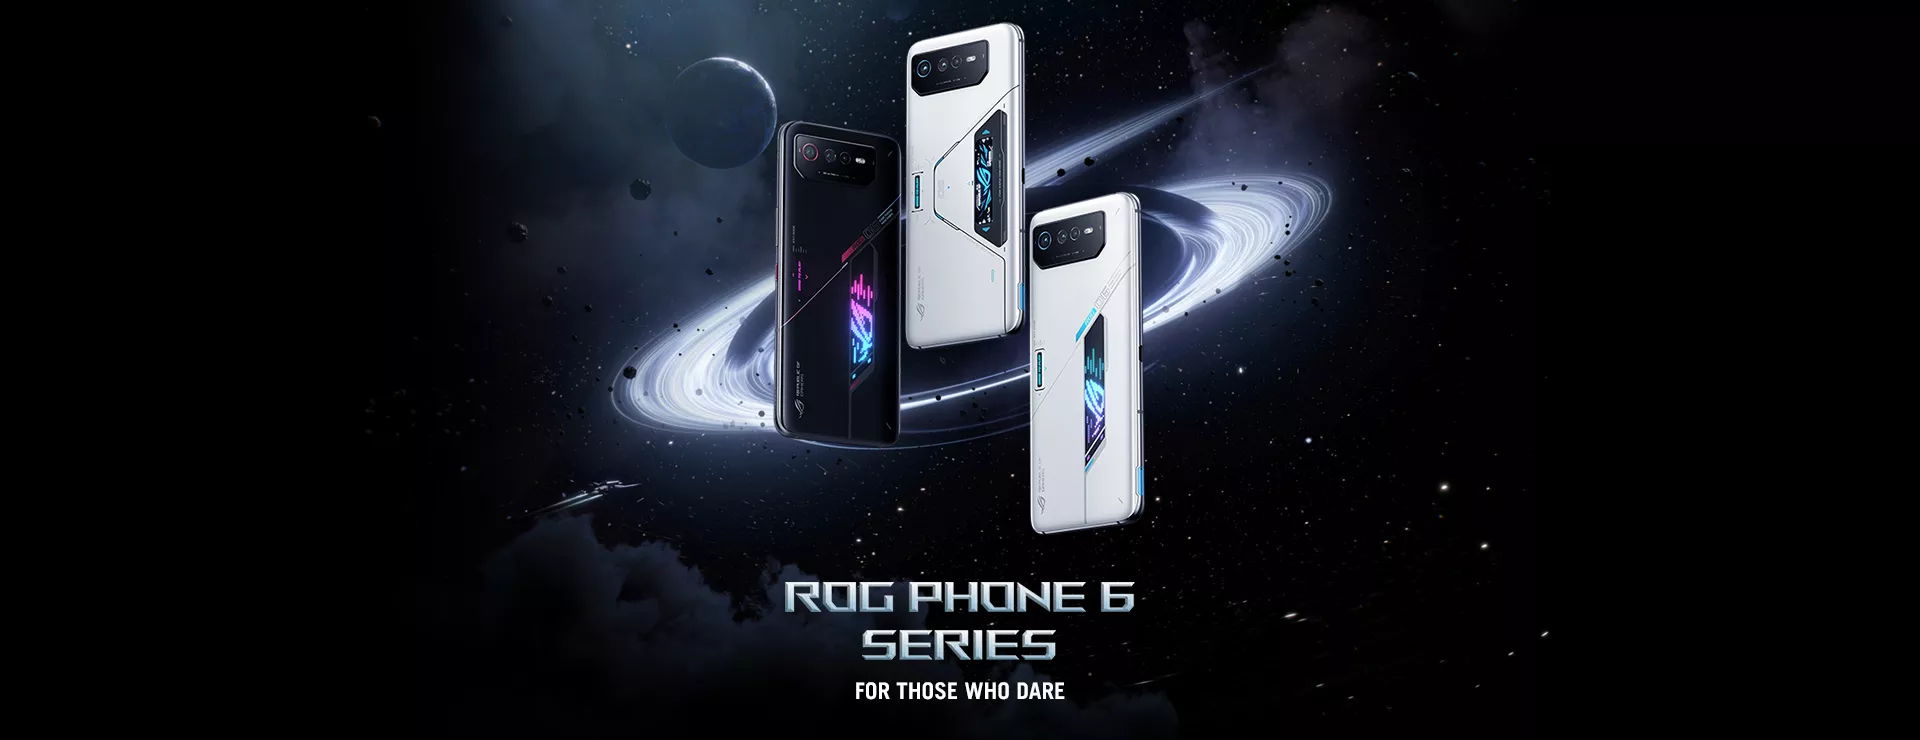 ROG Phone 6 Series.  For Those Who Dare